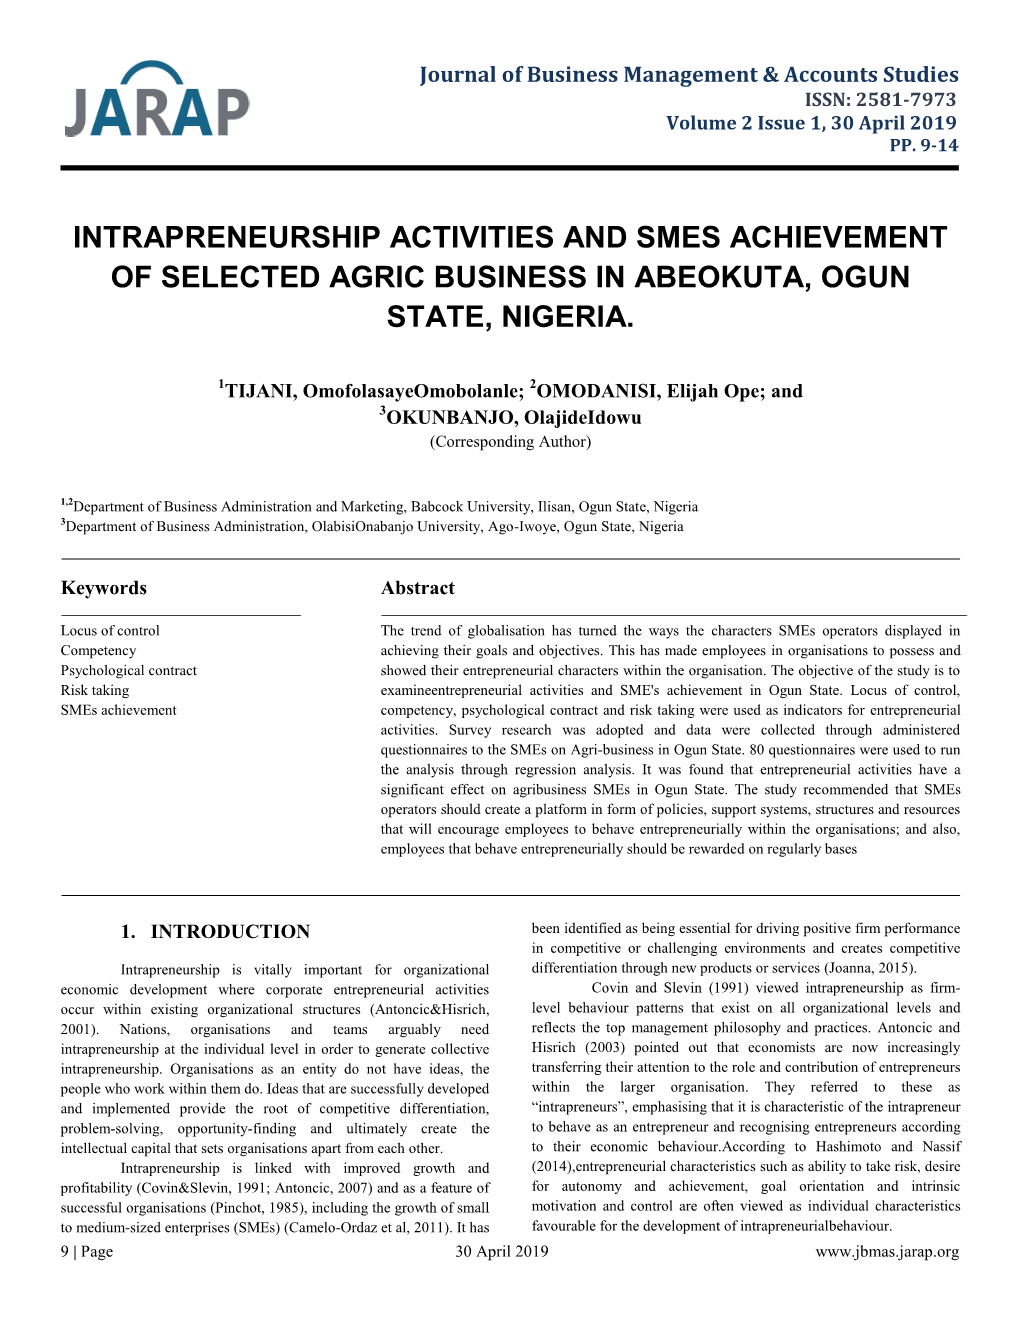 Intrapreneurship Activities and Smes Achievement of Selected Agric Business in Abeokuta, Ogun State, Nigeria